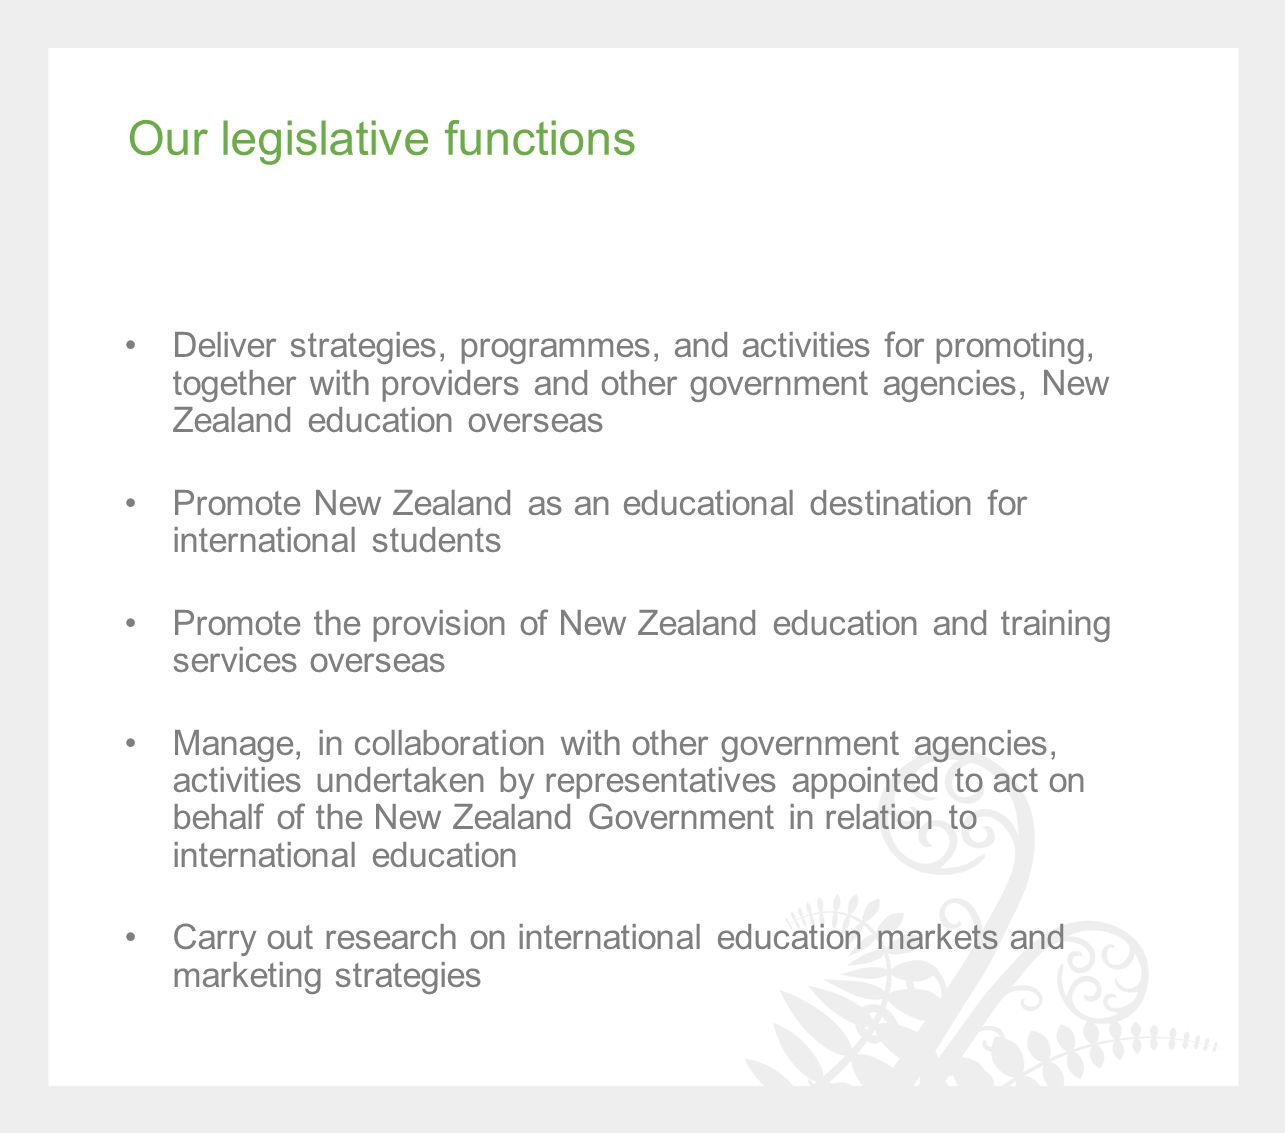 Our legislative functions Deliver strategies, programmes, and activities for promoting, together with providers and other government agencies, New Zealand education overseas Promote New Zealand as an educational destination for international students Promote the provision of New Zealand education and training services overseas Manage, in collaboration with other government agencies, activities undertaken by representatives appointed to act on behalf of the New Zealand Government in relation to international education Carry out research on international education markets and marketing strategies